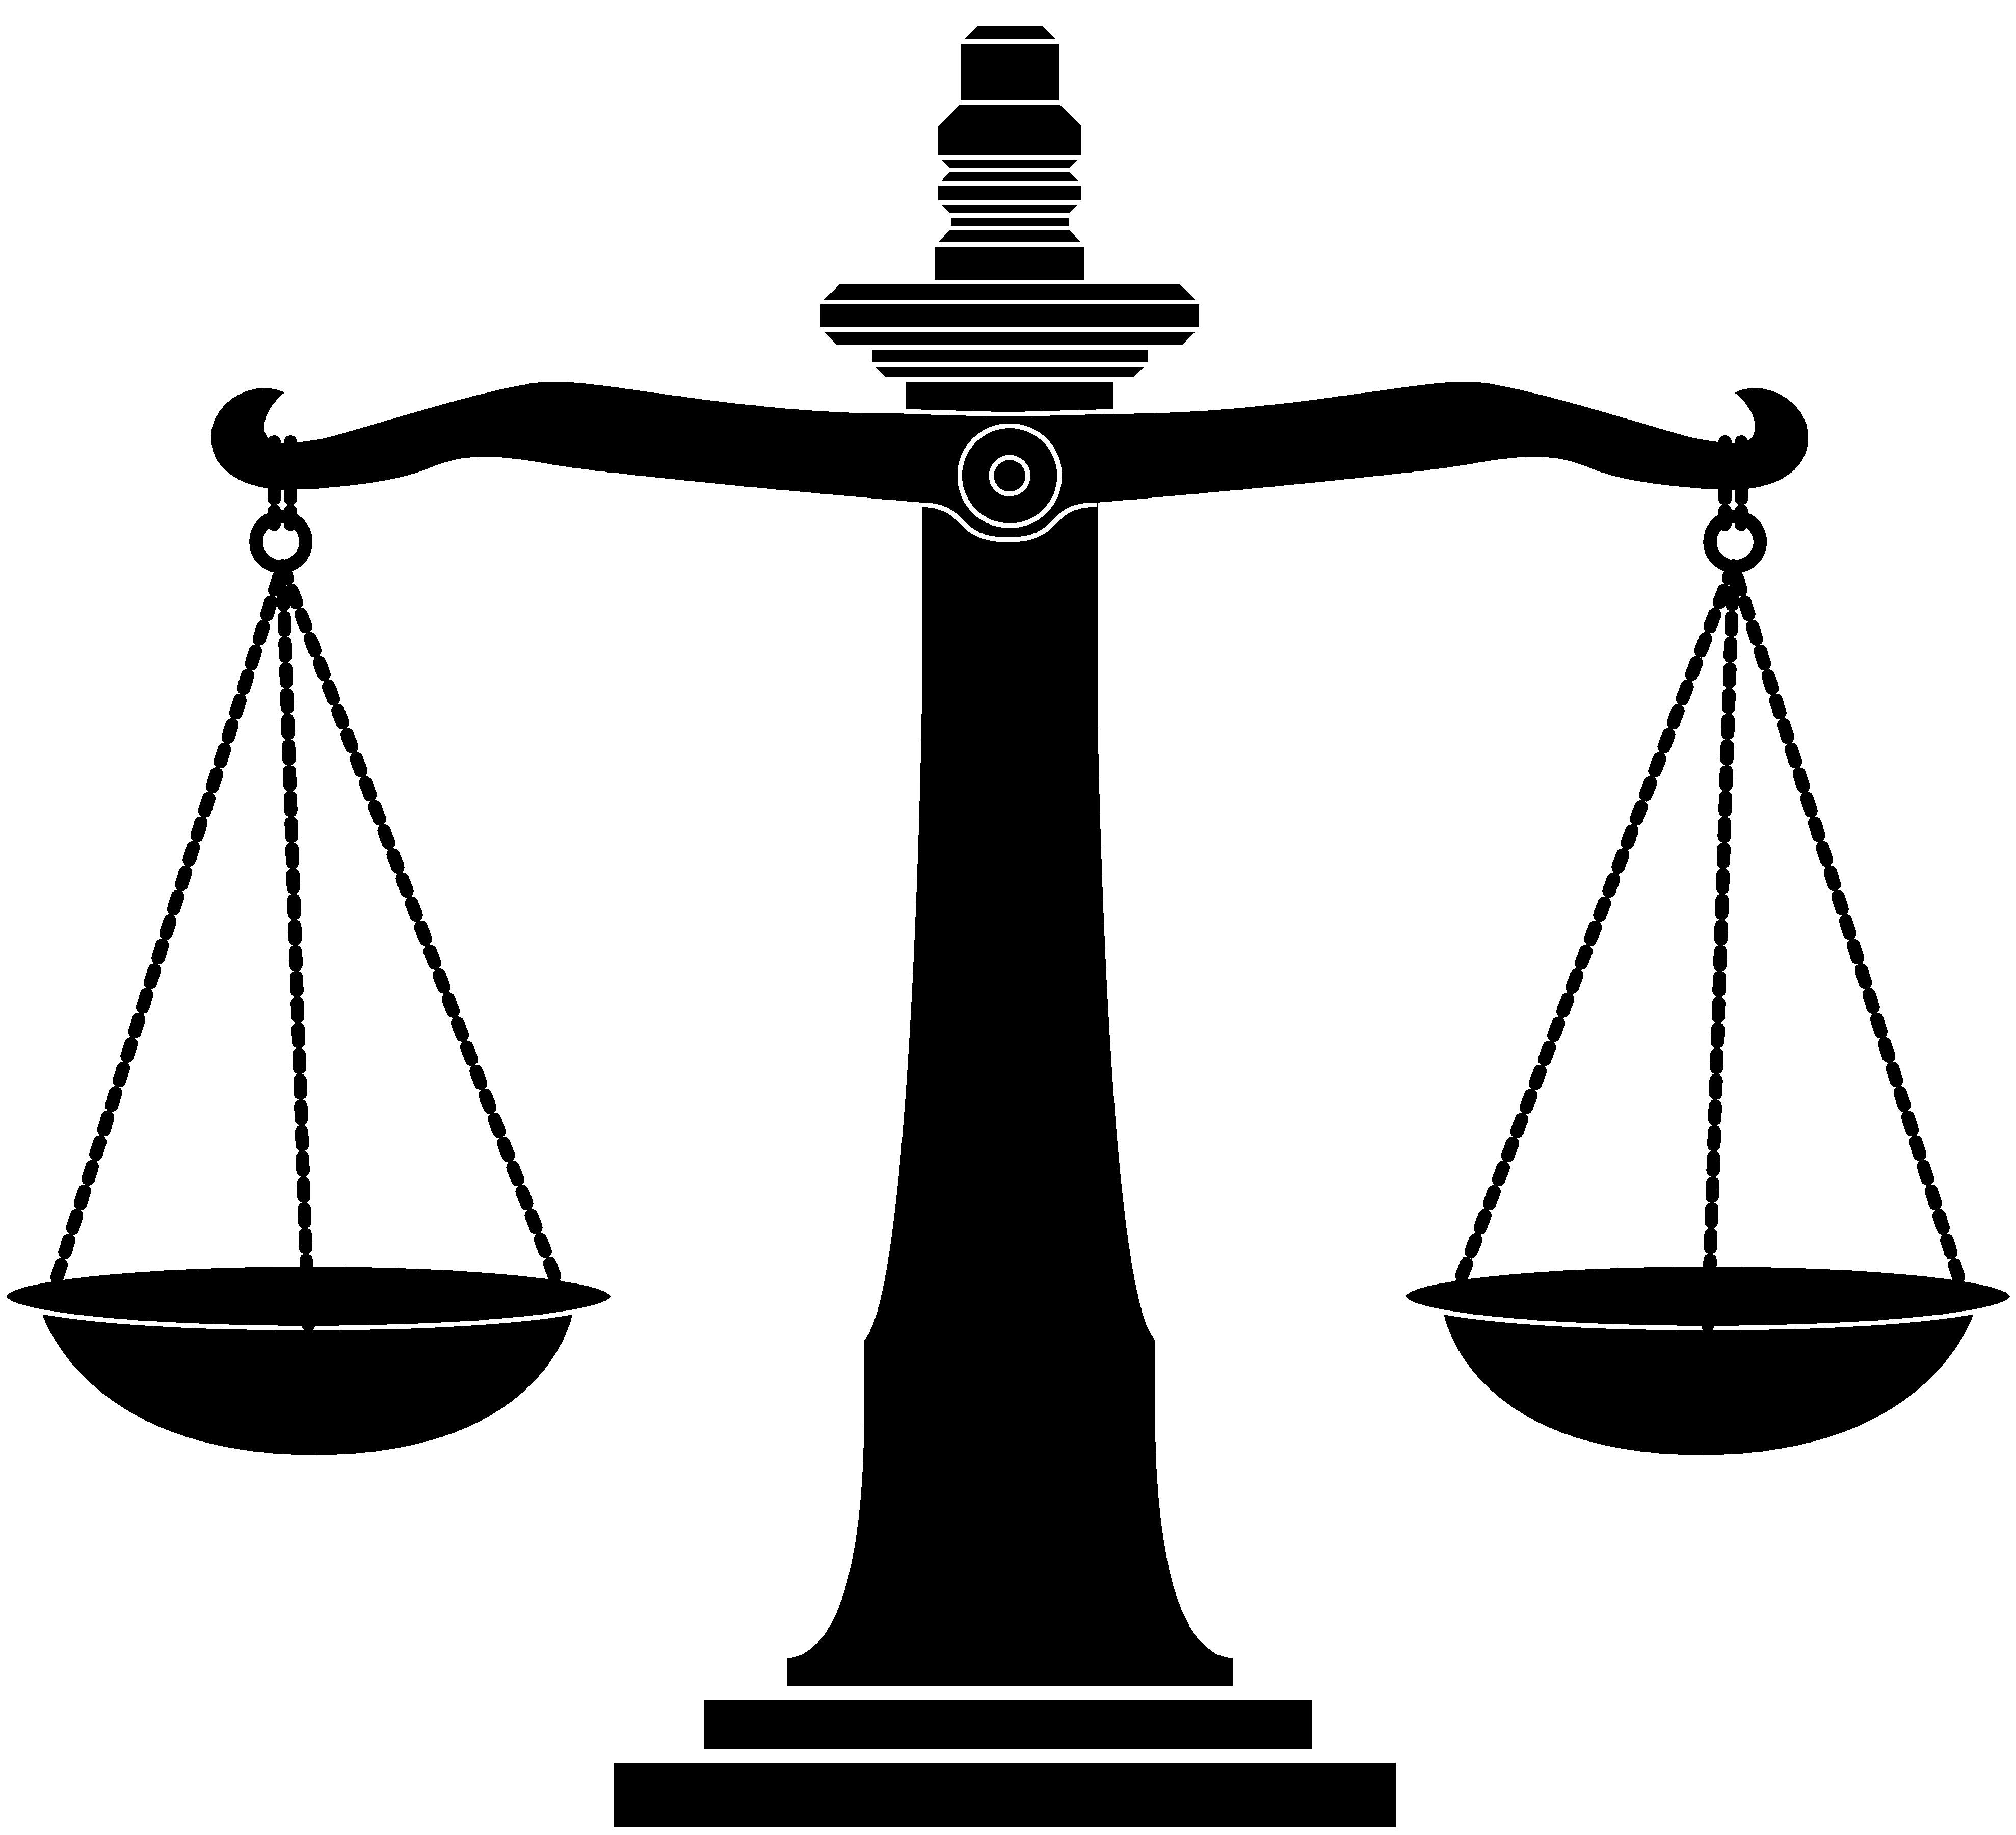 Image Of Scales Of Justice - ClipArt Best